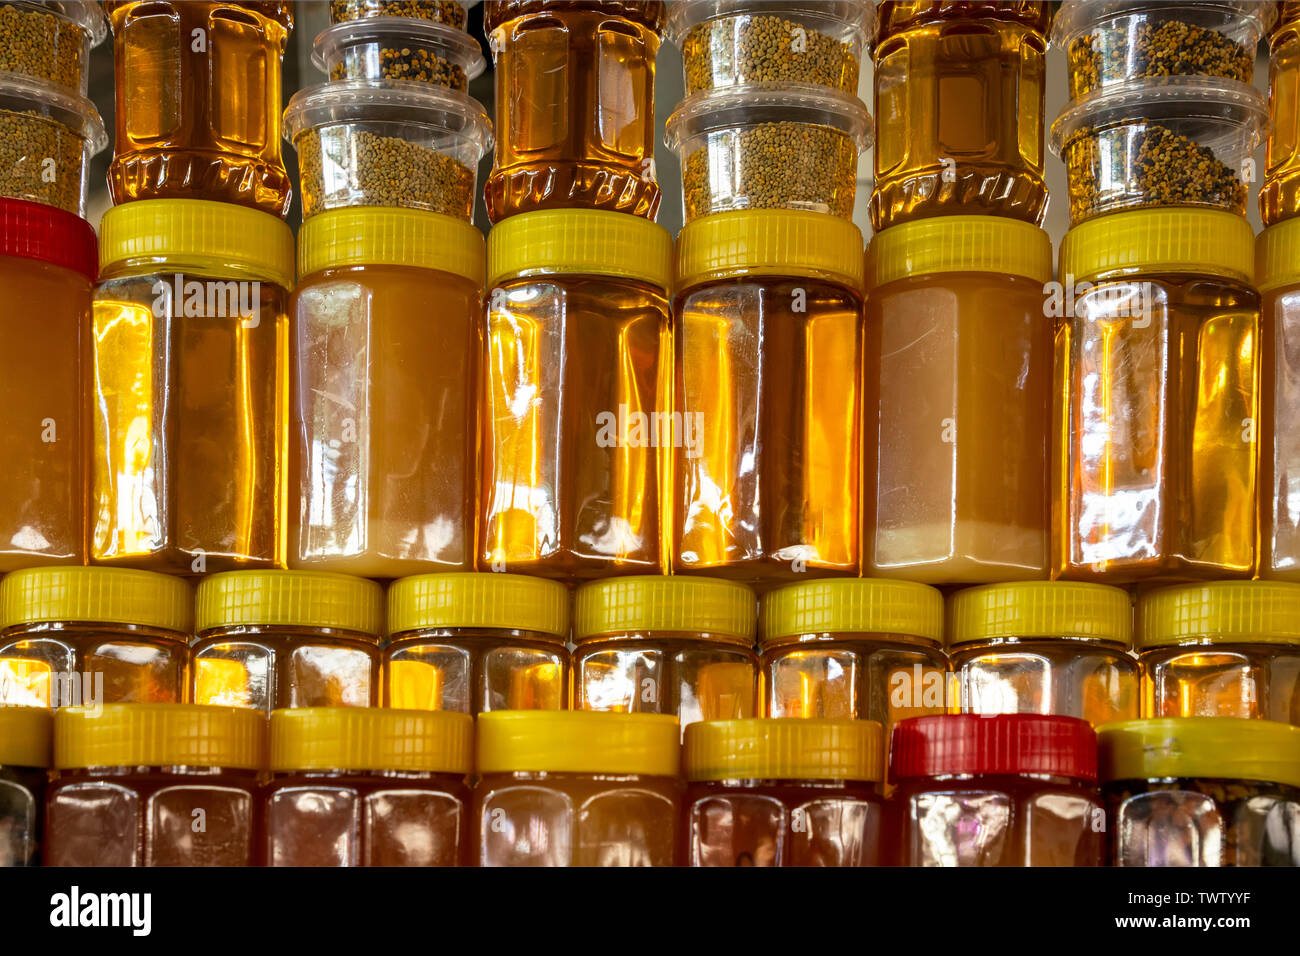 Rows of plastic jars filled with honey and seeds of plants Stock Photo